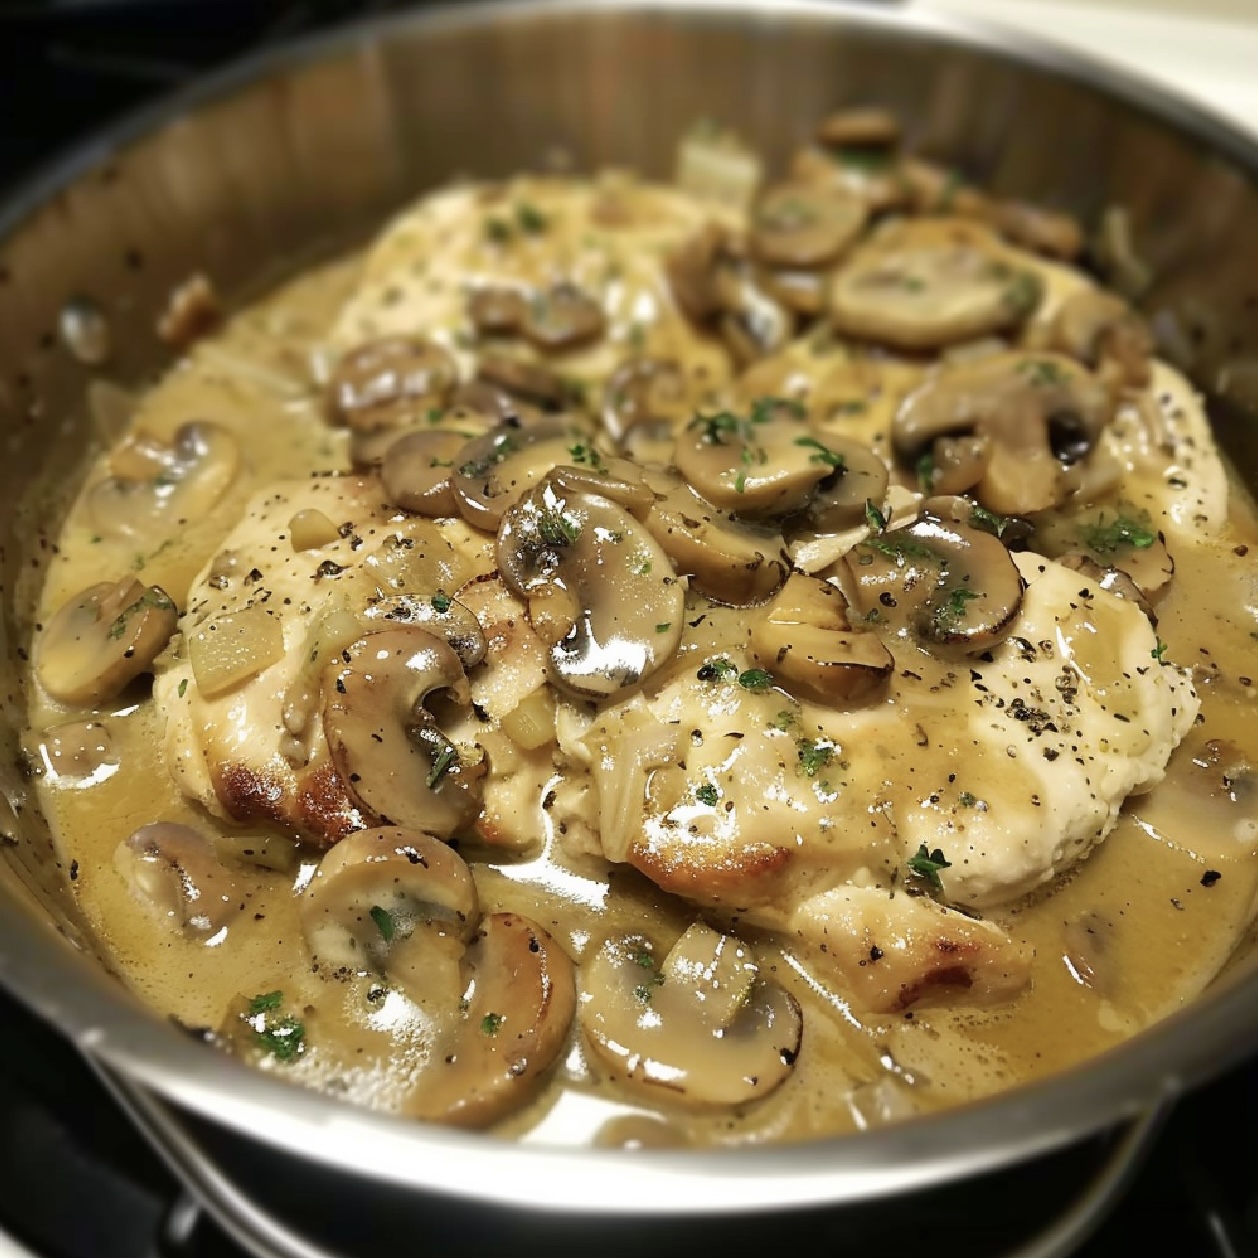 Fill your dinner table with smiles with this hearty and flavorful Mushroom Chicken slow cooker recipe.